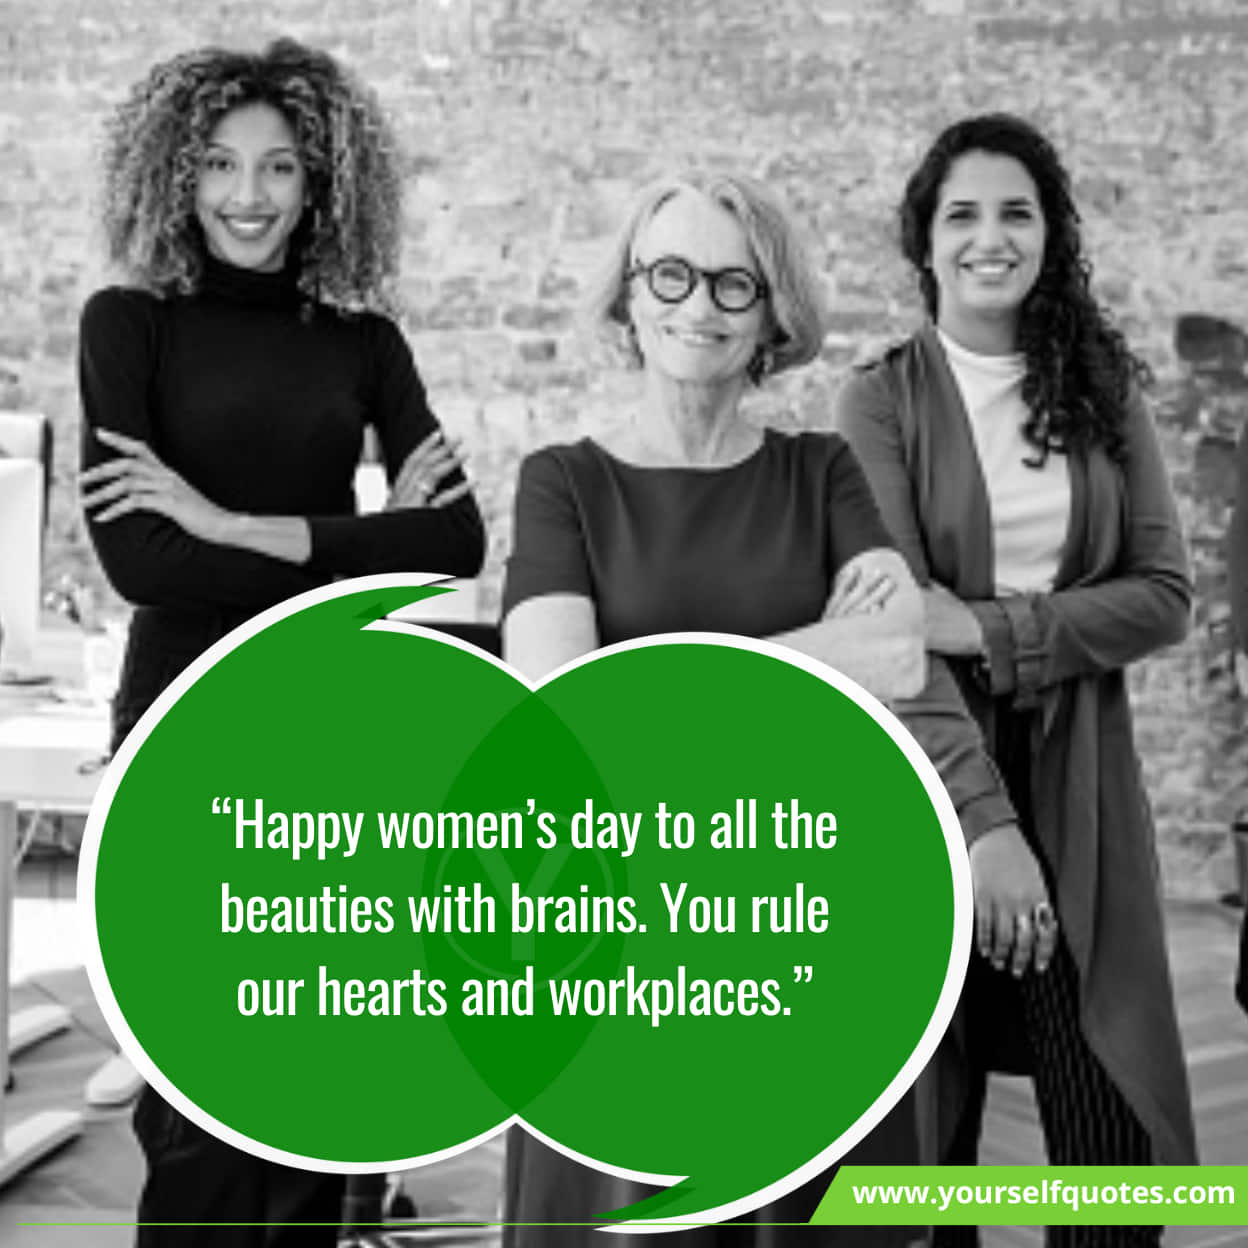 Heart-Warming Women's Day Wishes For Employees